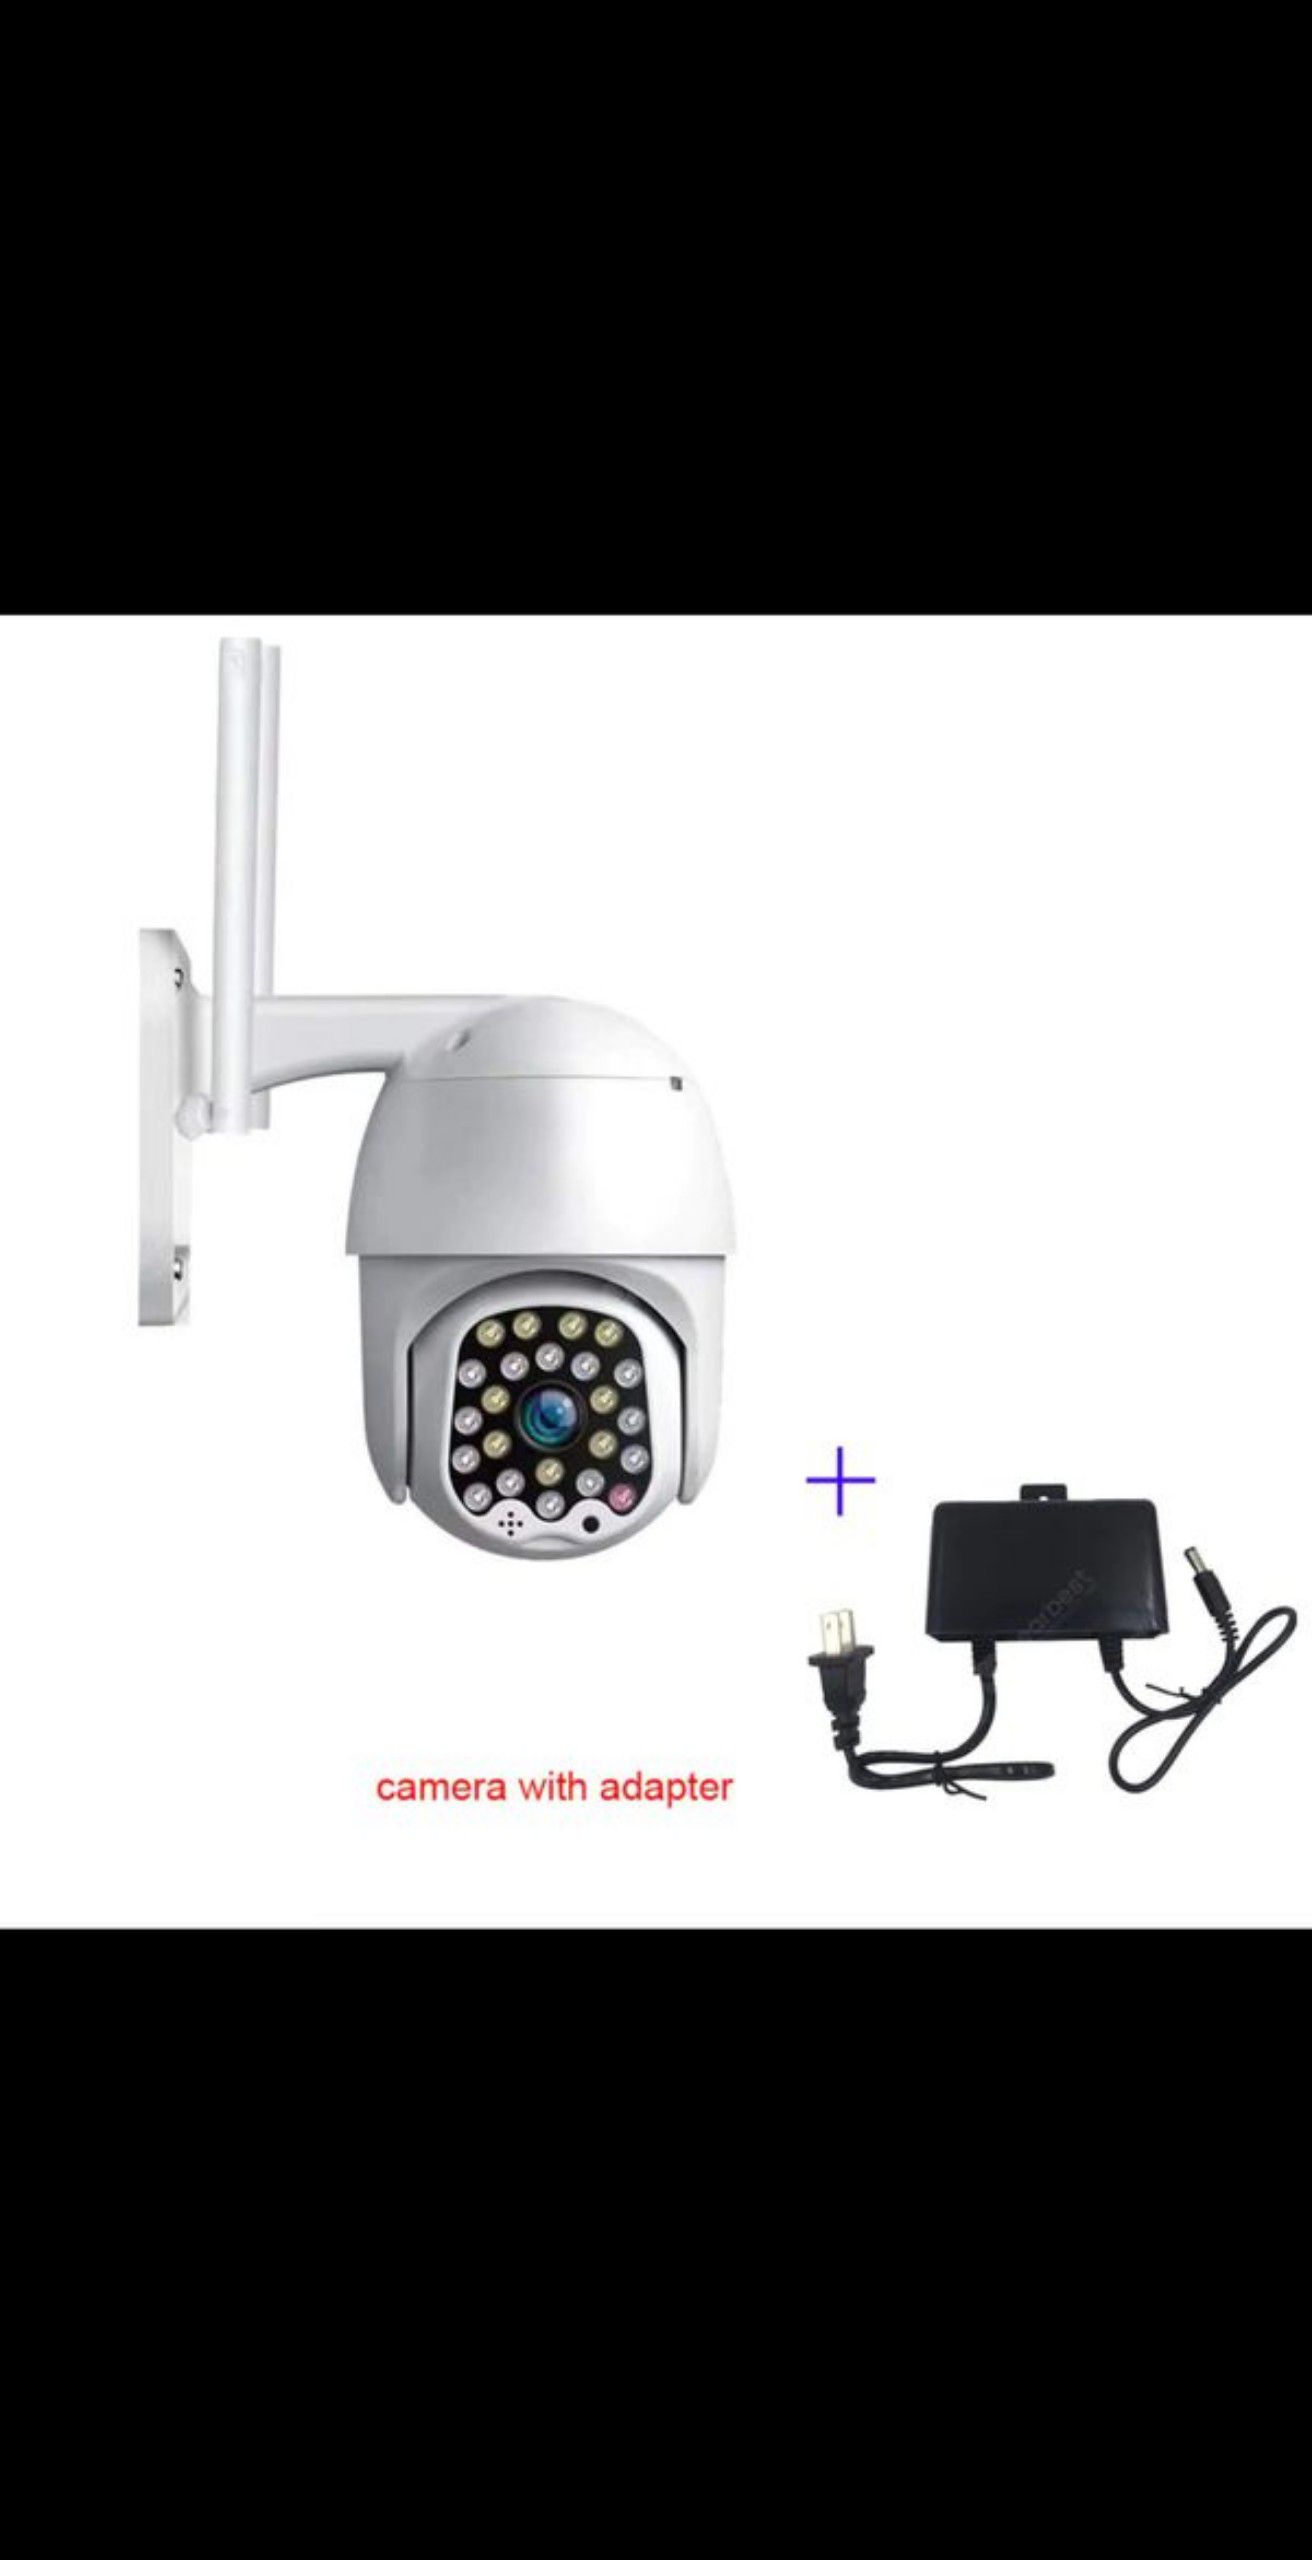 CP08-23 1080P Wifi PTZ camera Auto tracking SD card Slot for CCTV Home Security Camera - Camera with adapter 3.6mm